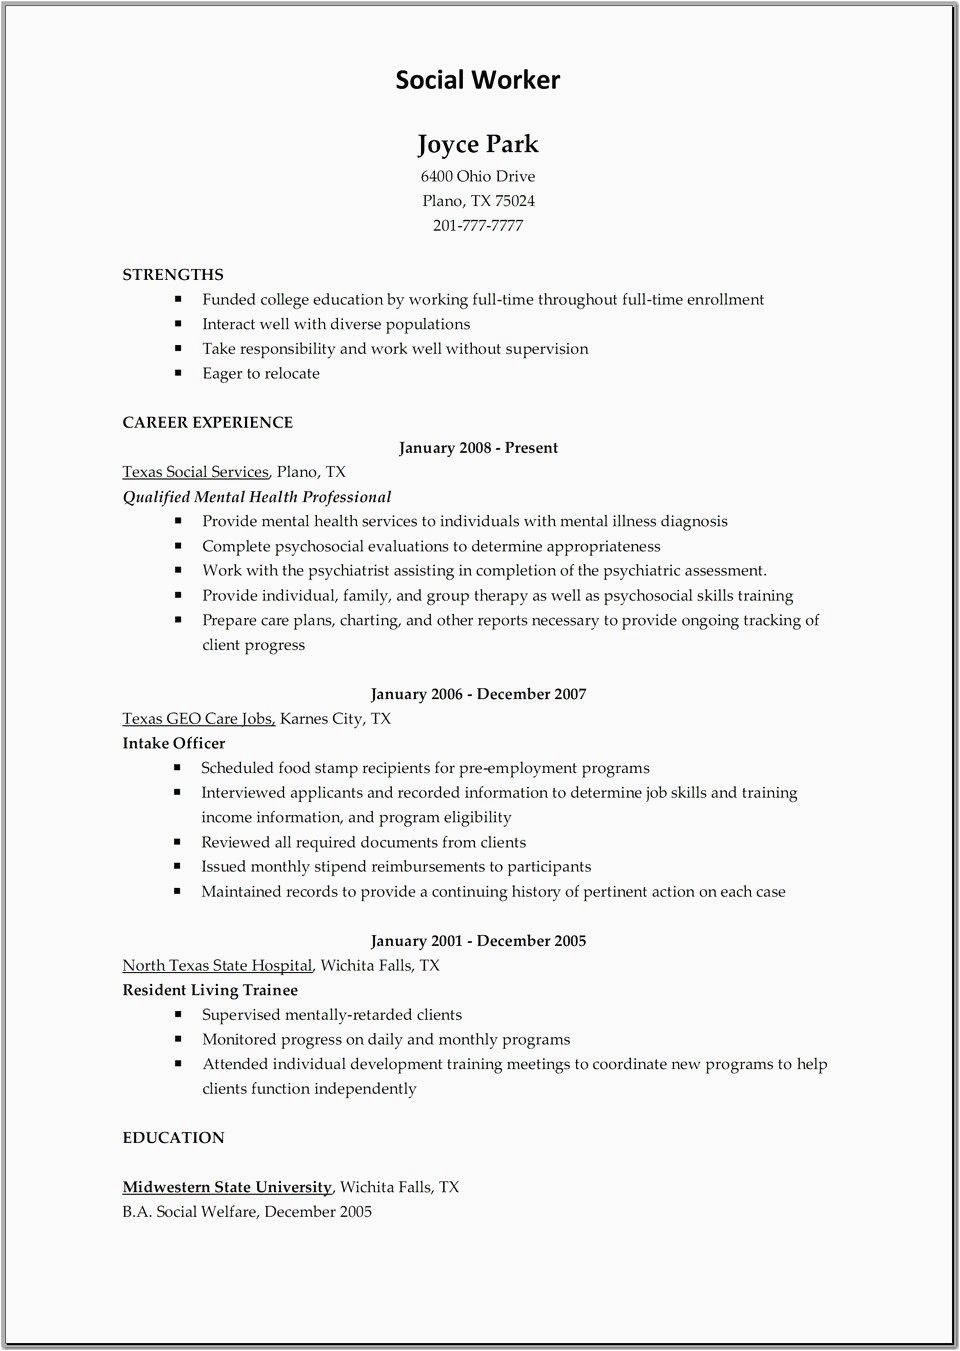 Sample Resume for Aged Care Worker with No Experience Luxury Download Child Care Resume Sample In 2020